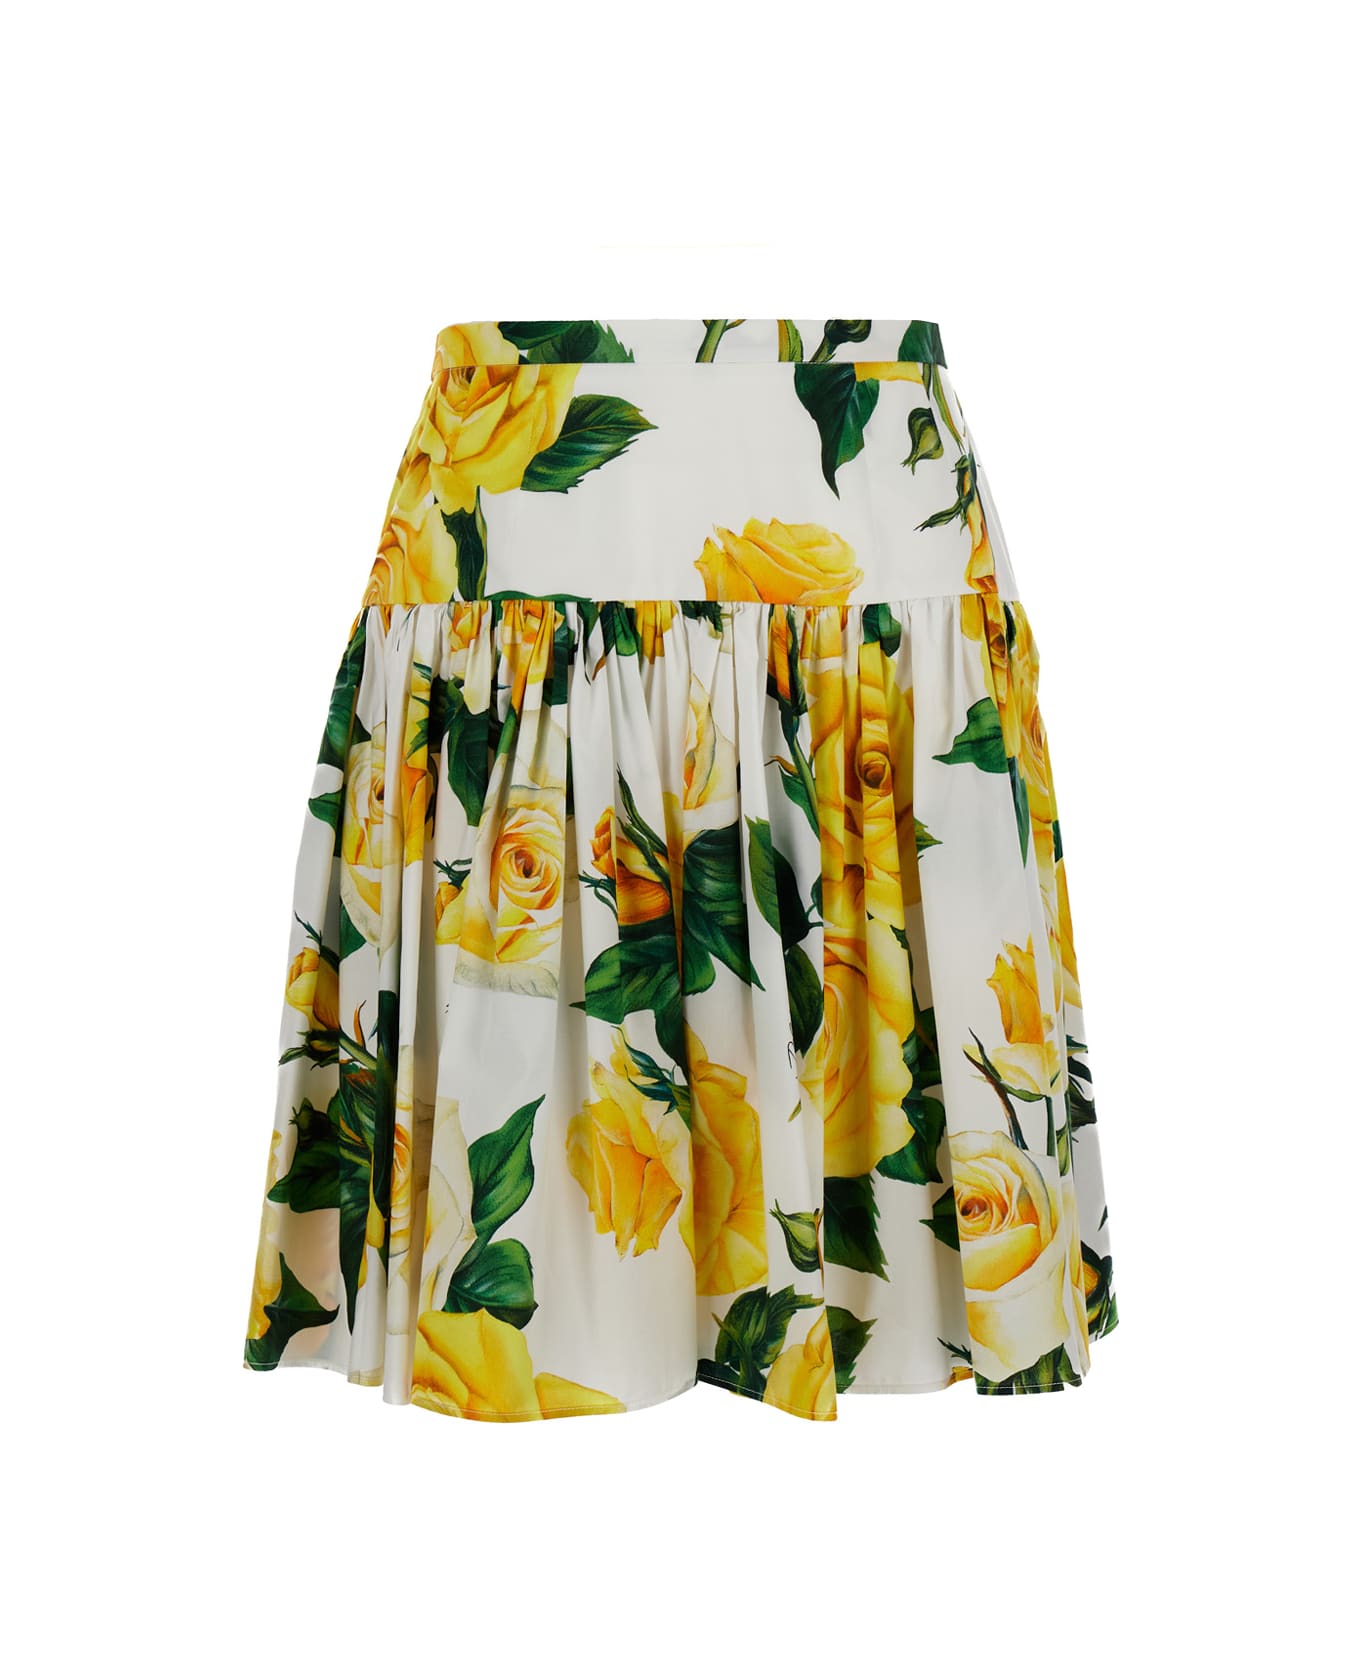 Dolce & Gabbana All-over Rose Print Mini Skirt In Cotton Woman - Yellow